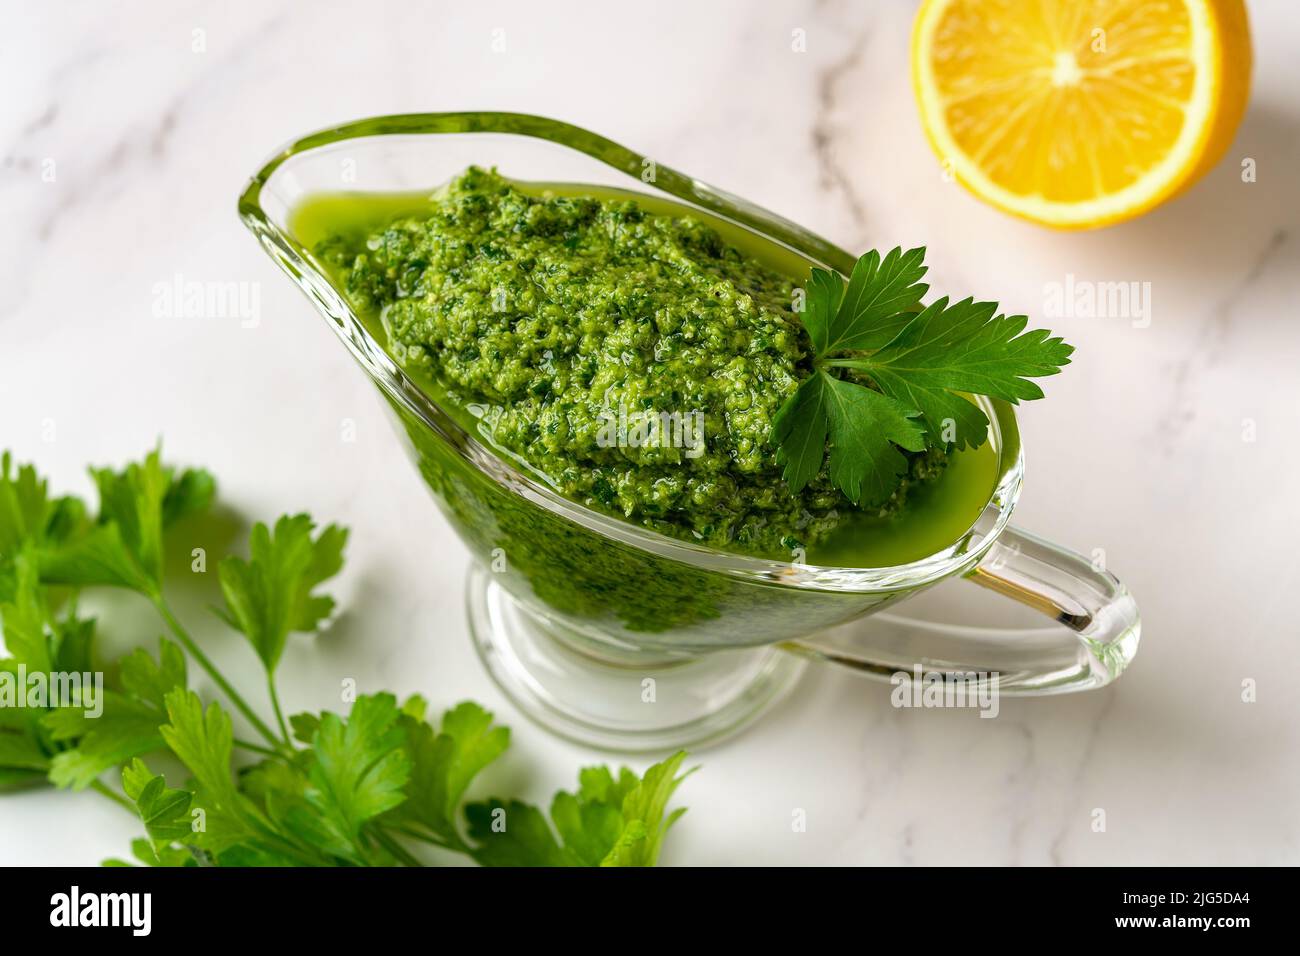 Chimichurri dipping sauce in a gravy boat on a table. Green sauce from fresh parsley, garlic cloves, olive oil and lemon juice. Fresh salsa verde. Stock Photo